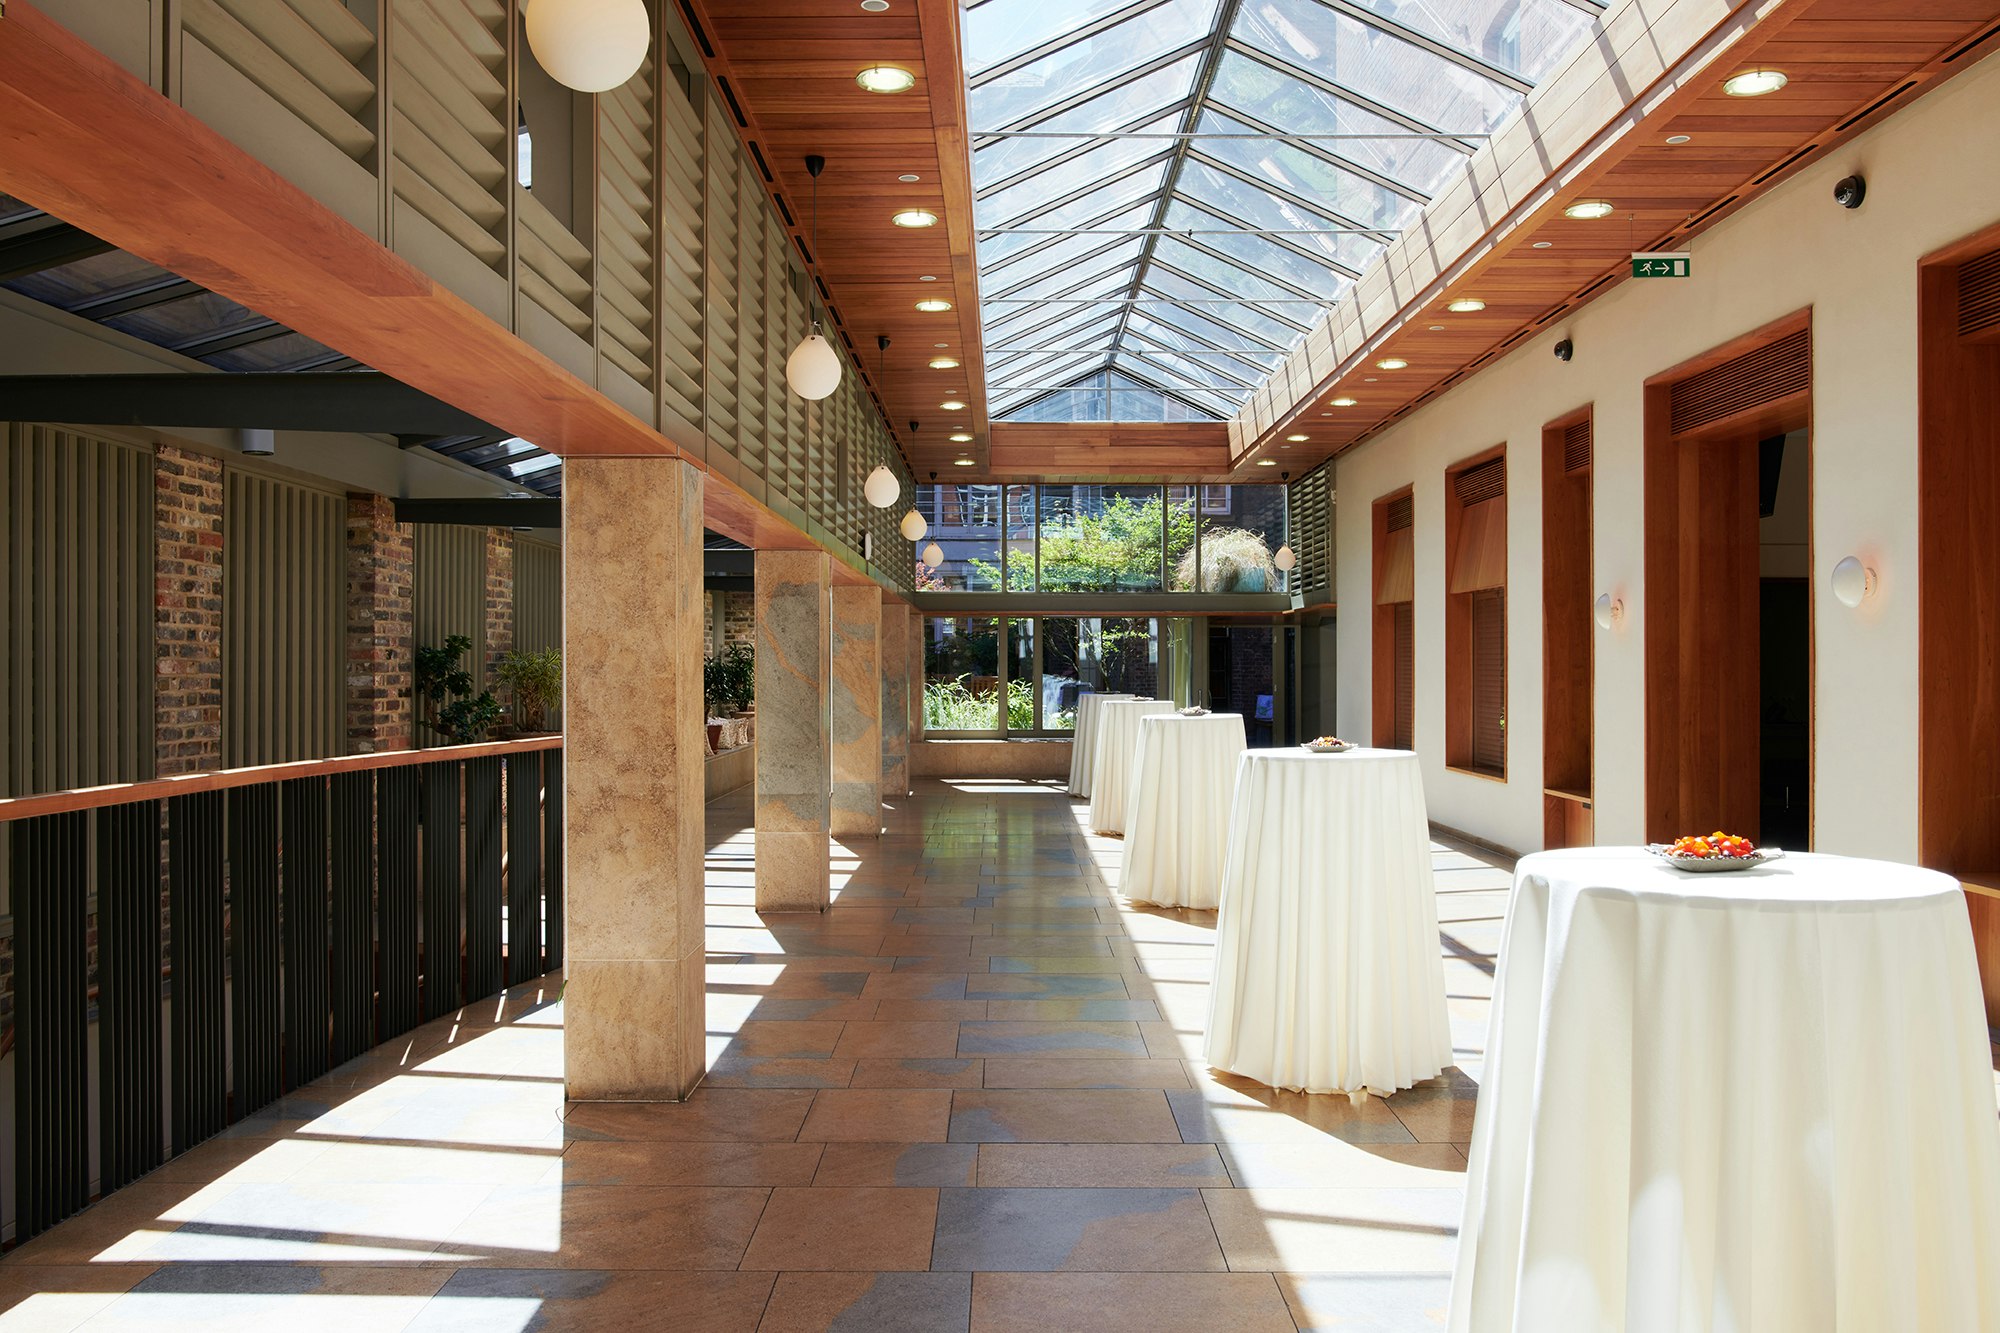 Networking Venues in London - No.11 Cavendish Square - Events in Orangery & Courtyard - Banner